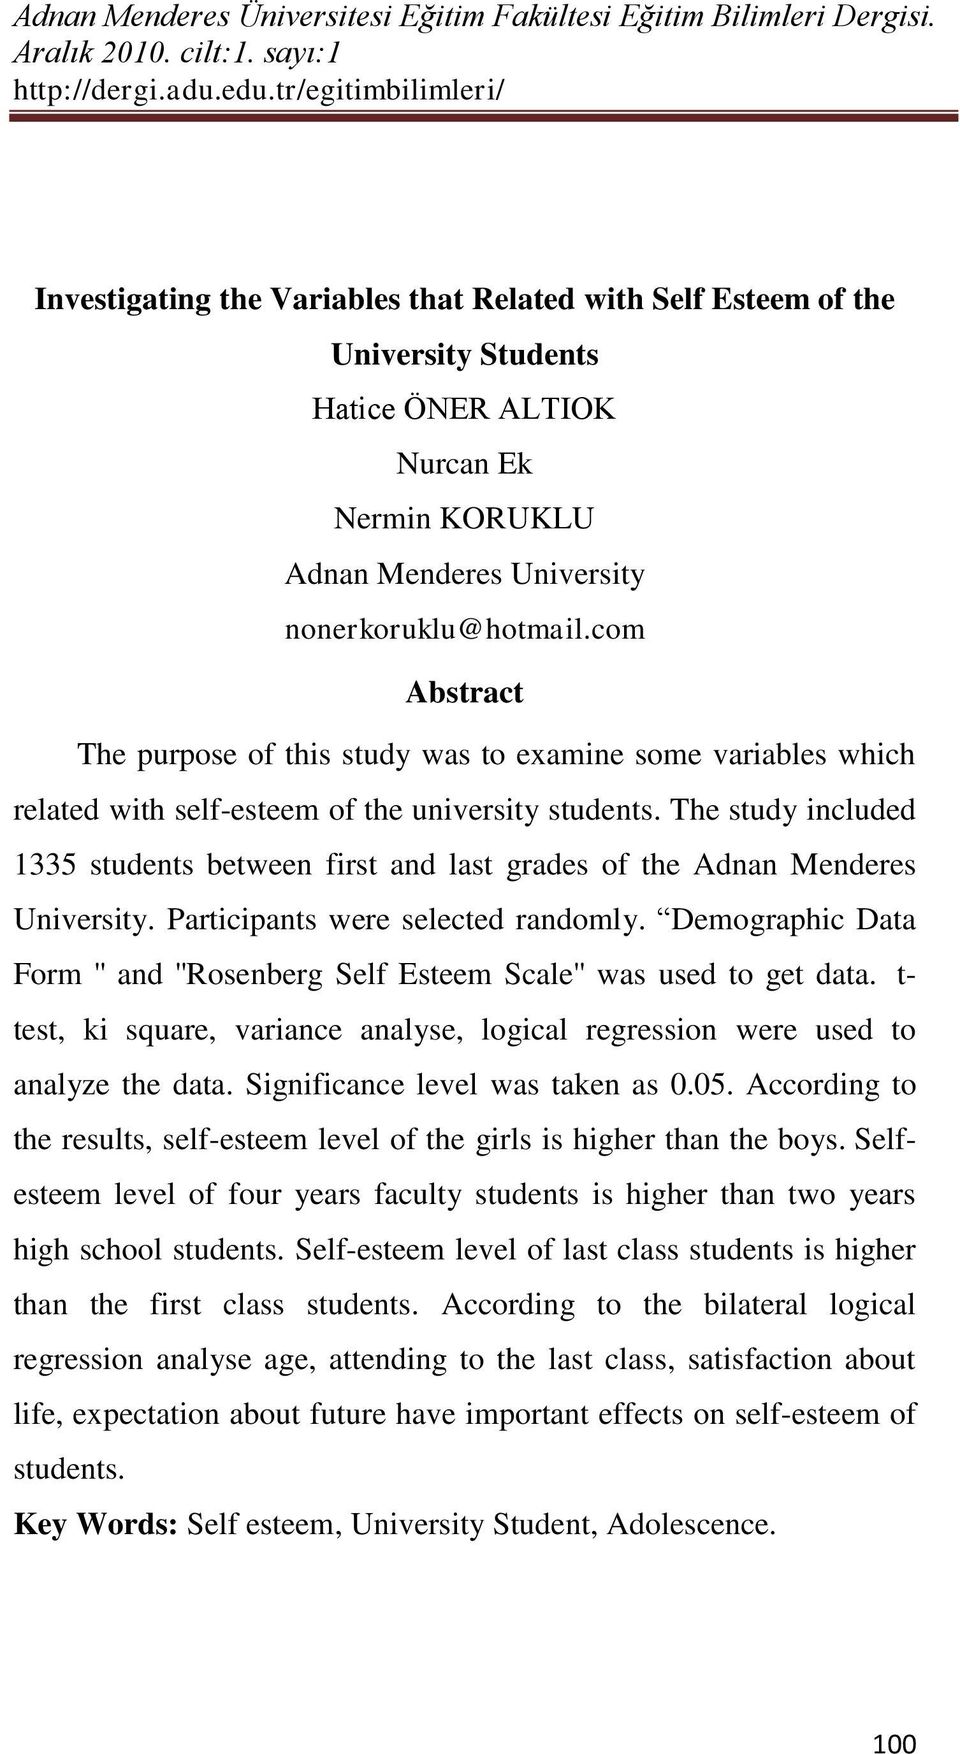 The study included 1335 students between first and last grades of the Adnan Menderes University. Participants were selected randomly.